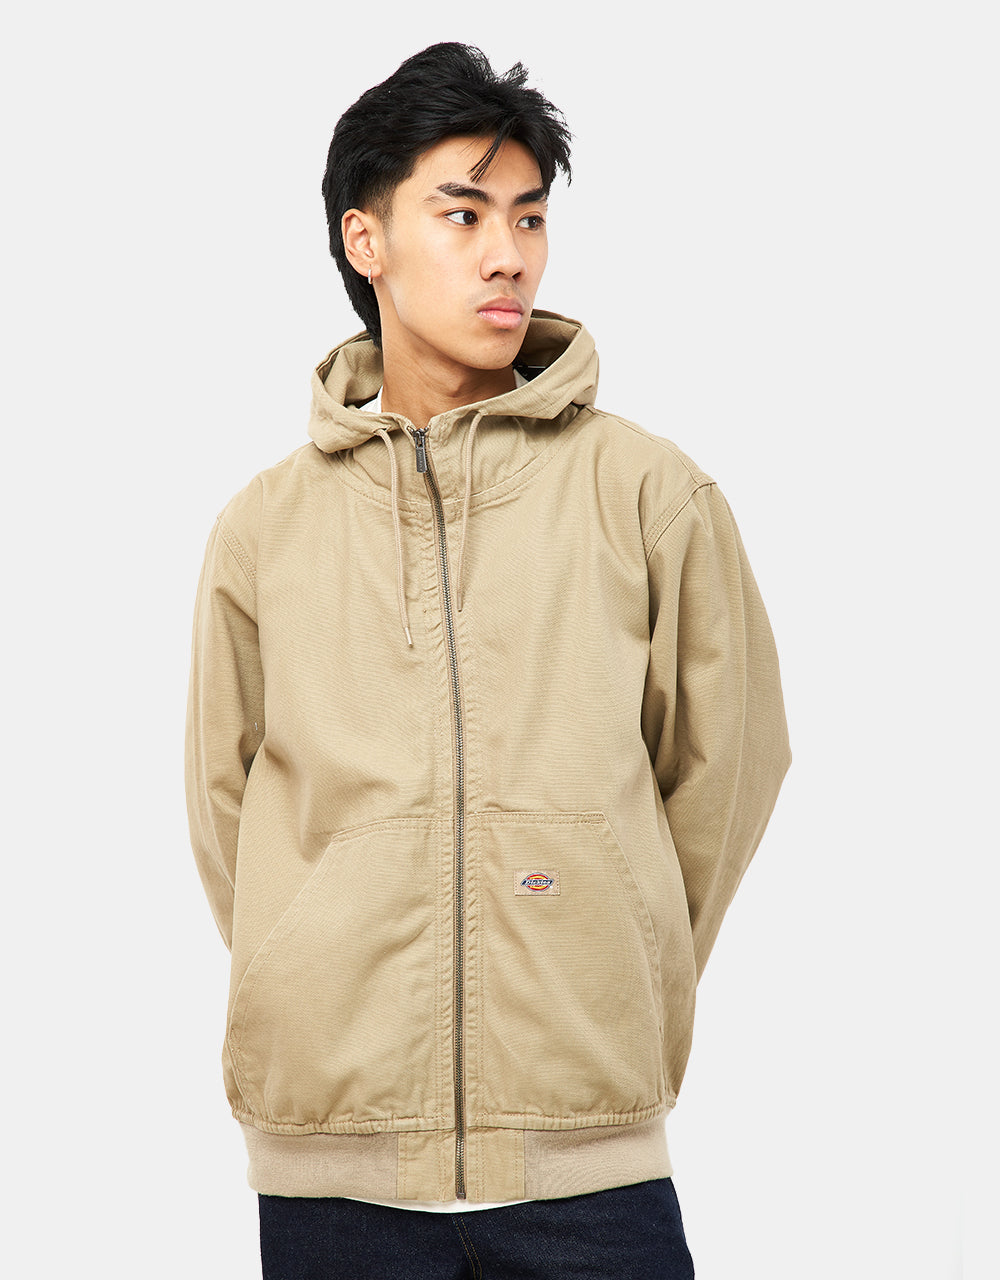 Dickies Duck Canvas Hooded Unlined Jacket - Stone Washed Desert Sand